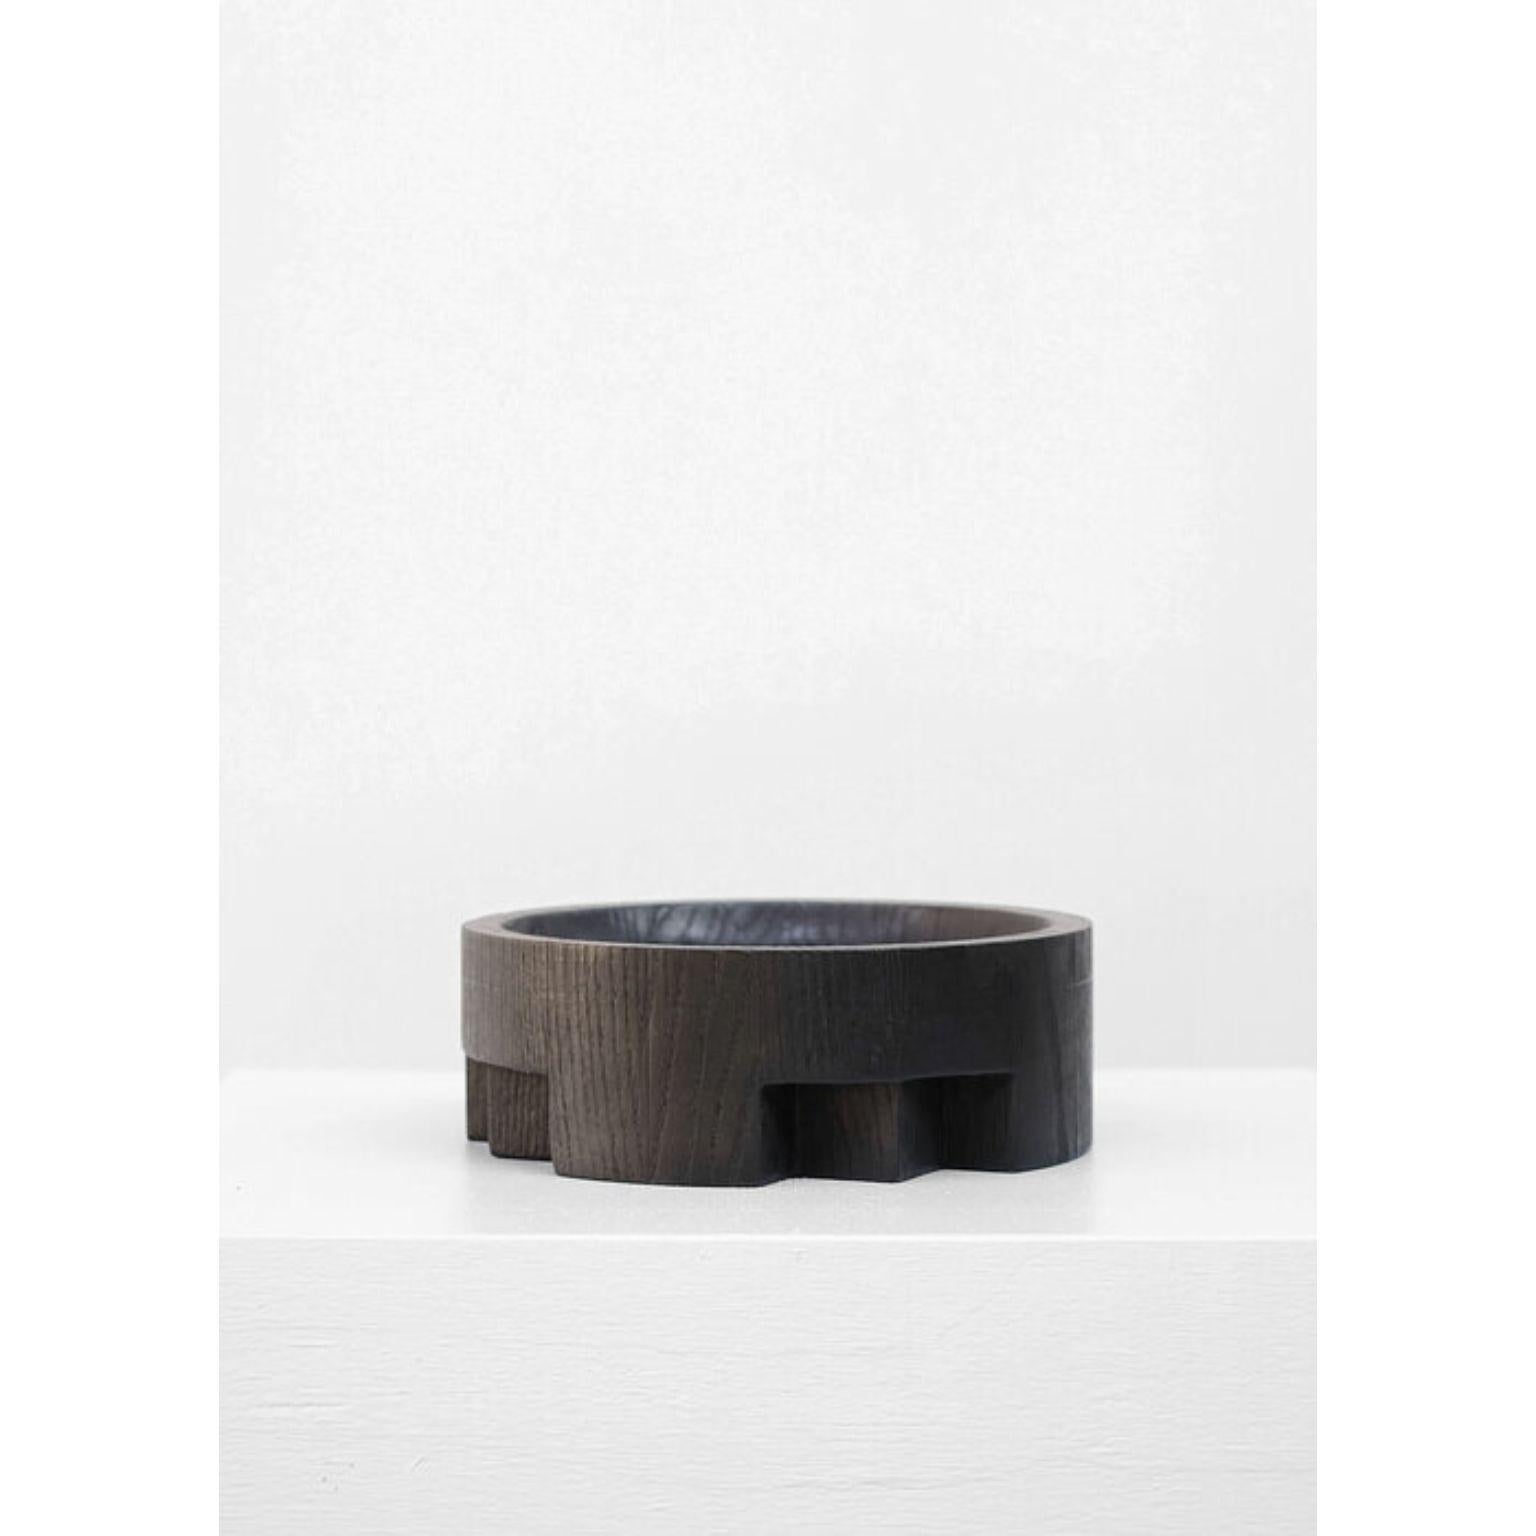 Disk tray small black by Arno Declercq
Dimensions: D 27 x W 27 x H 9 cm
Meterials: Burned and waxed oak
Signed by Arno Declercq

Arno Declercq
Belgian designer and art dealer who makes bespoke objects with passion for design, atmosphere,